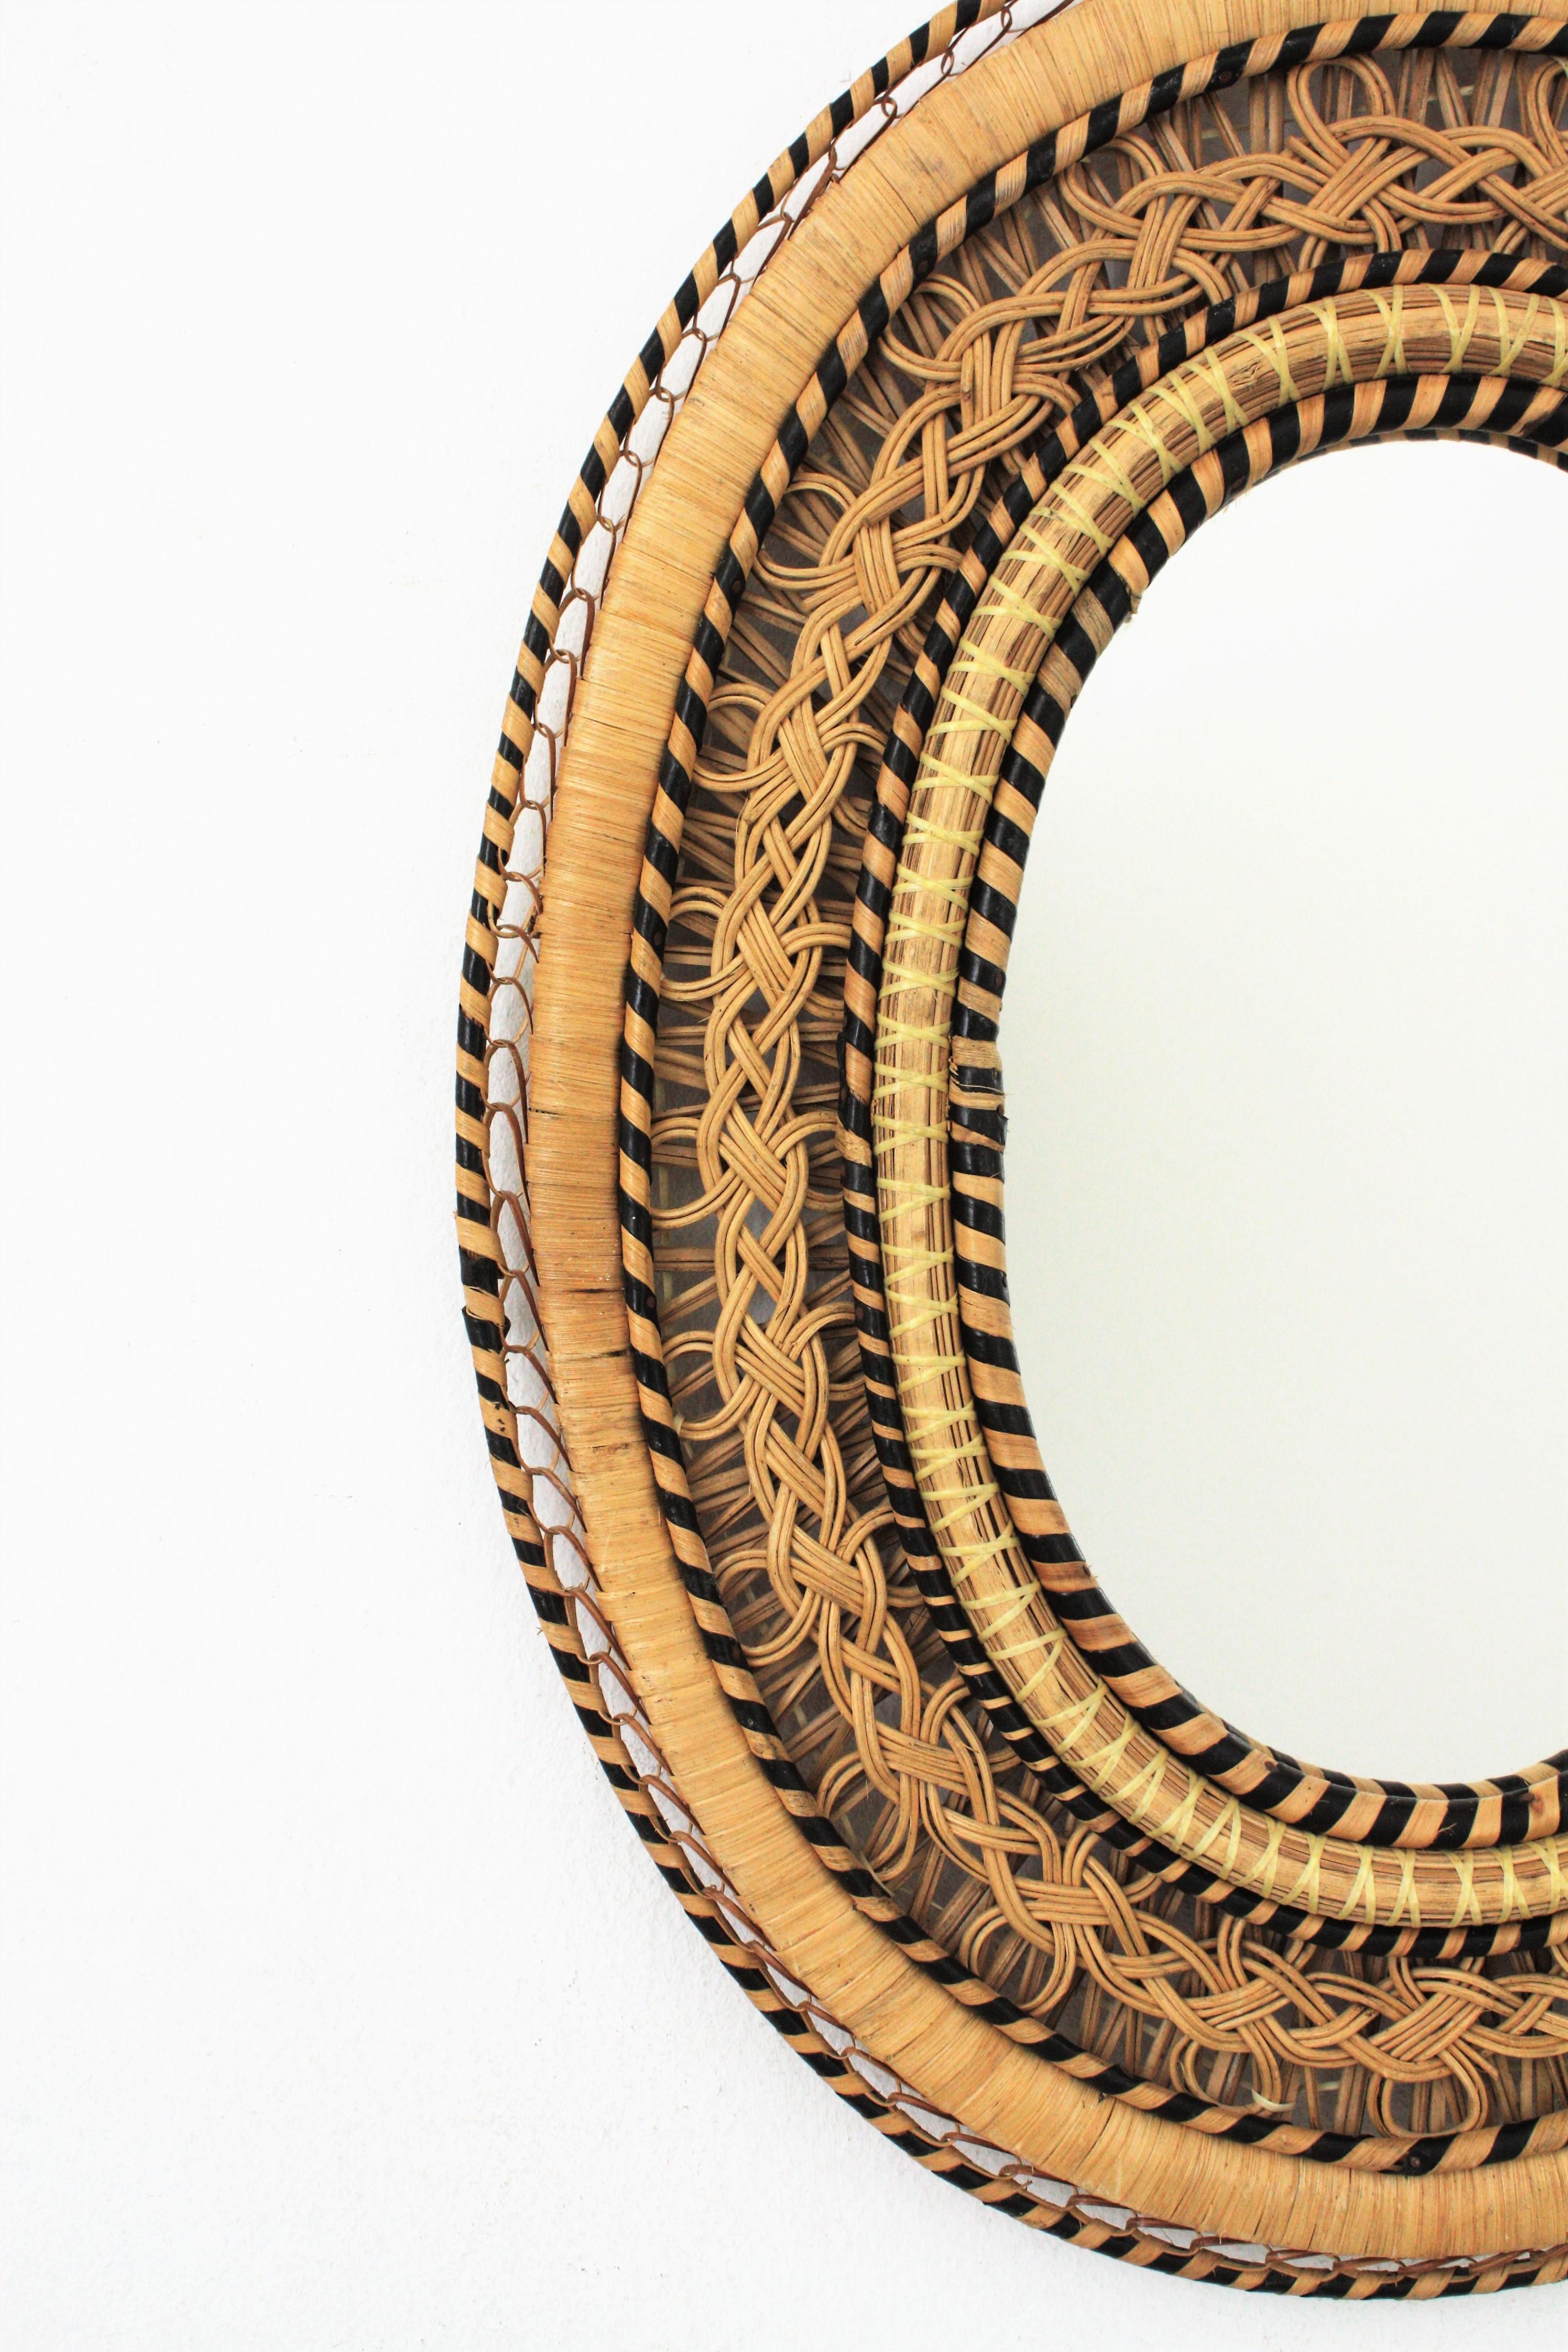 Hand-Crafted Rattan and Wicker Braided Emmanuelle Peacock Oval Mirror, 1970s